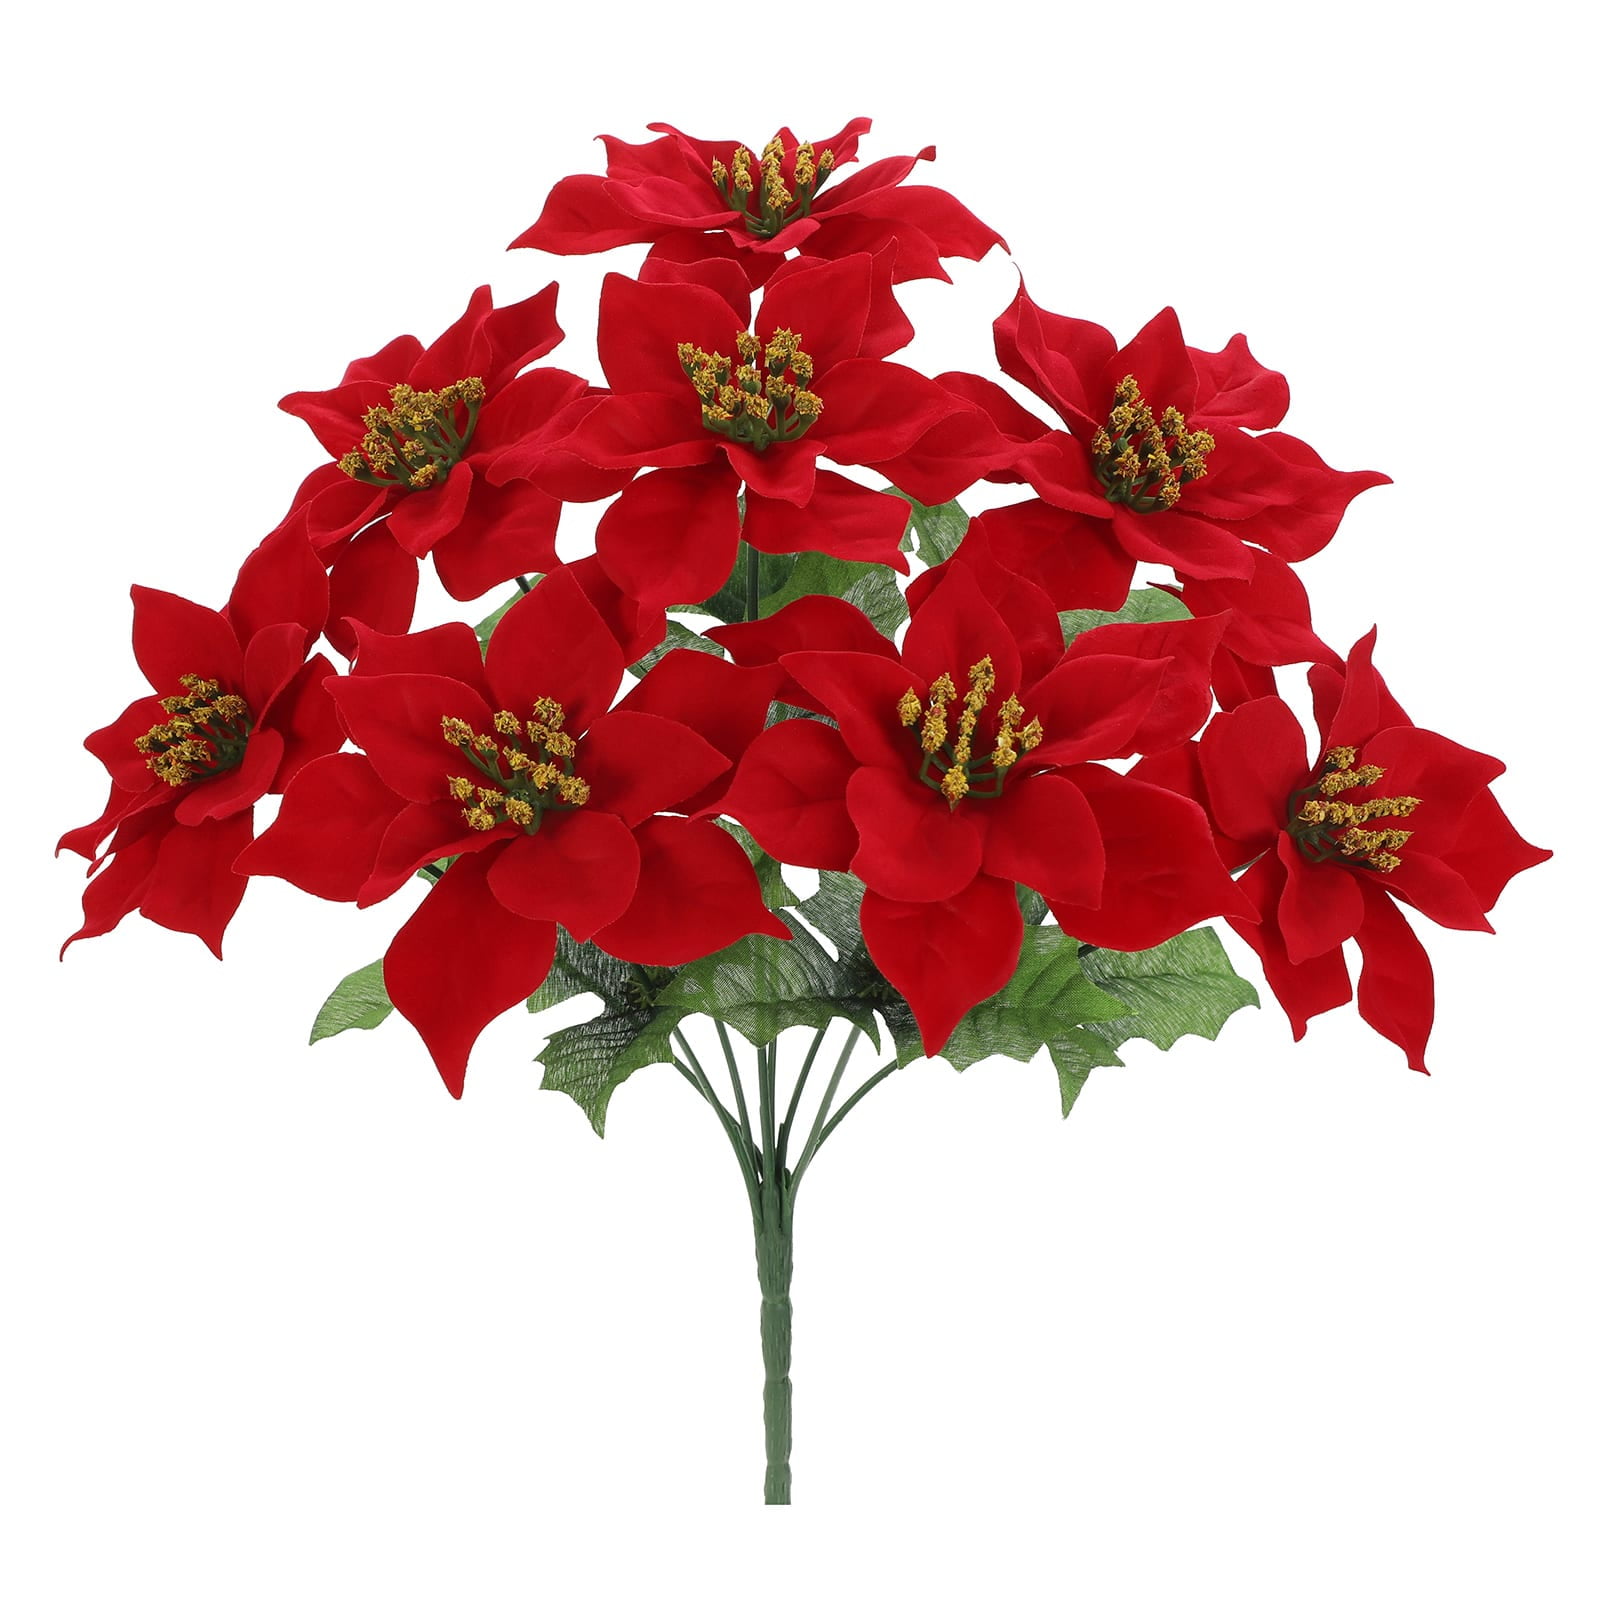 Red Small Poinsettia Bush by Ashland®-Christmas Floral, Arrangements ...